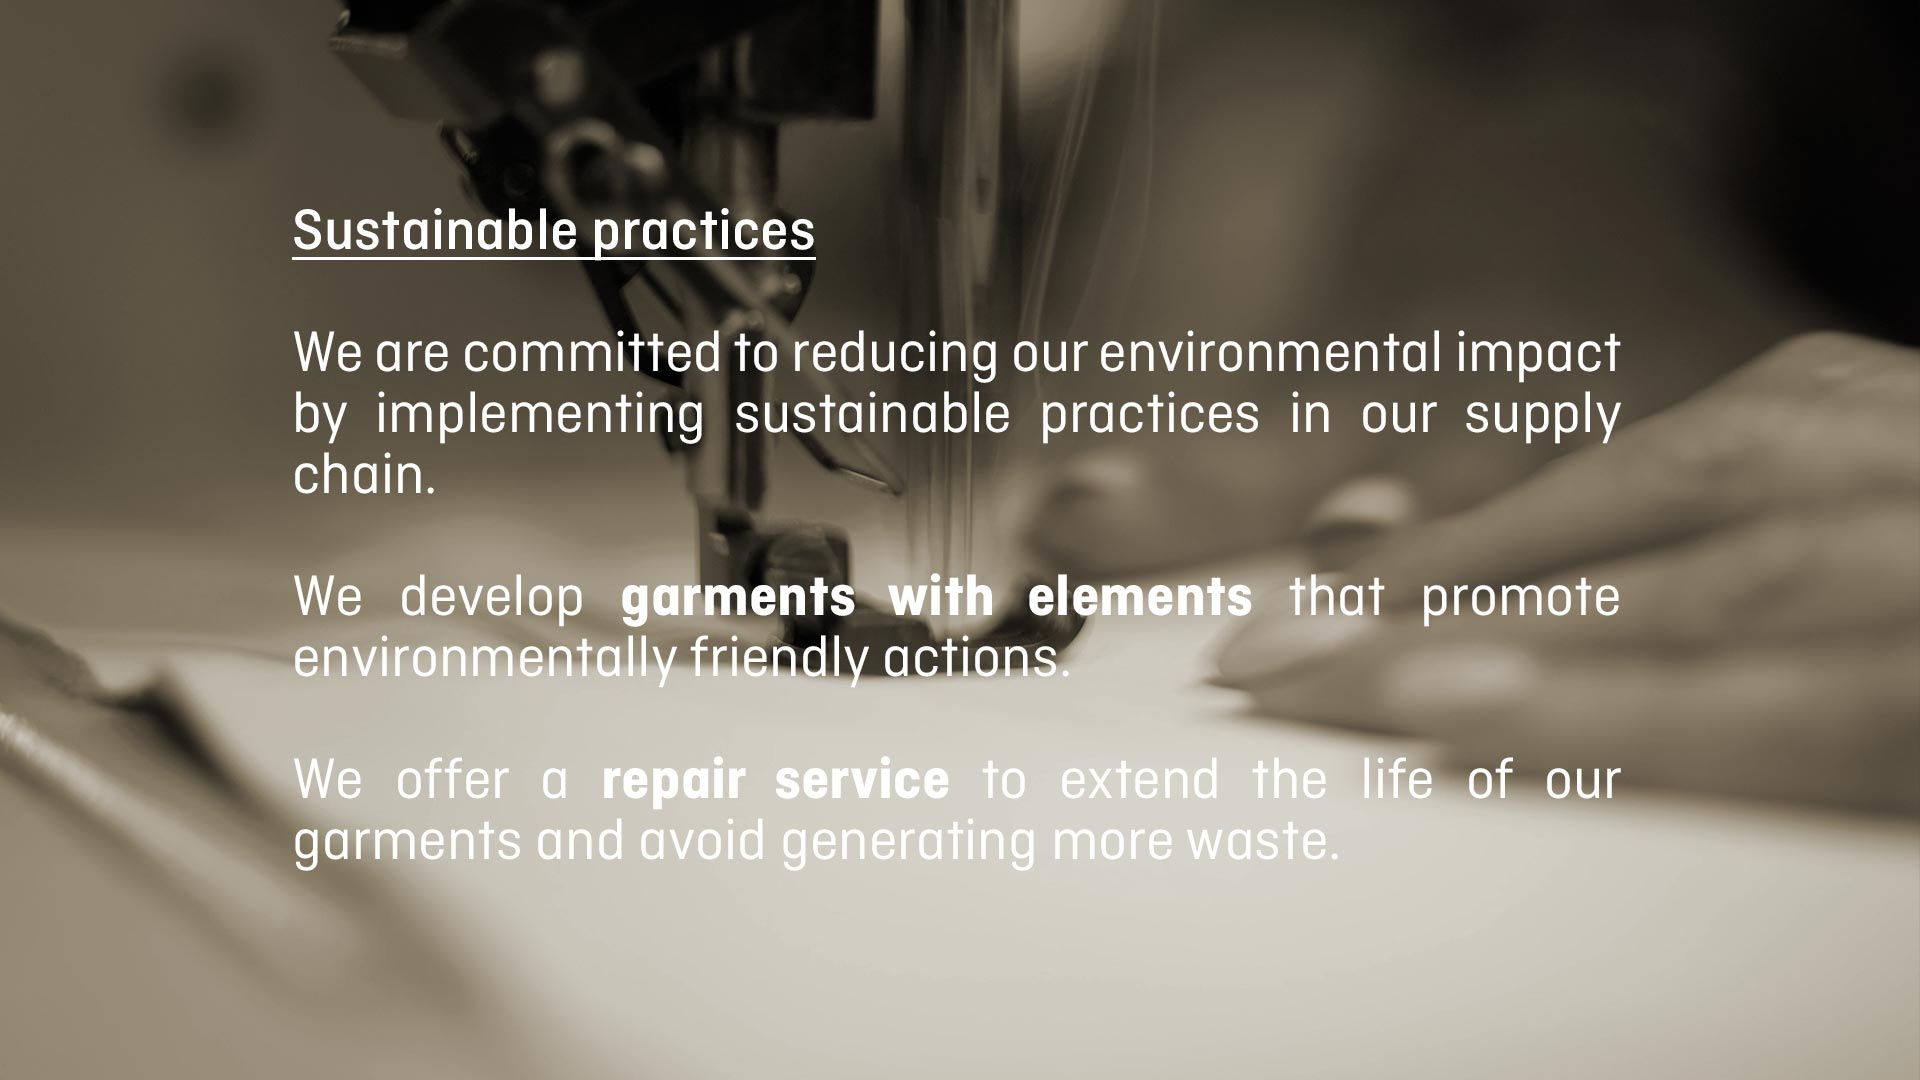 We are committed to reducing our environmental impact by implementing sustainable practices in our supply chain.